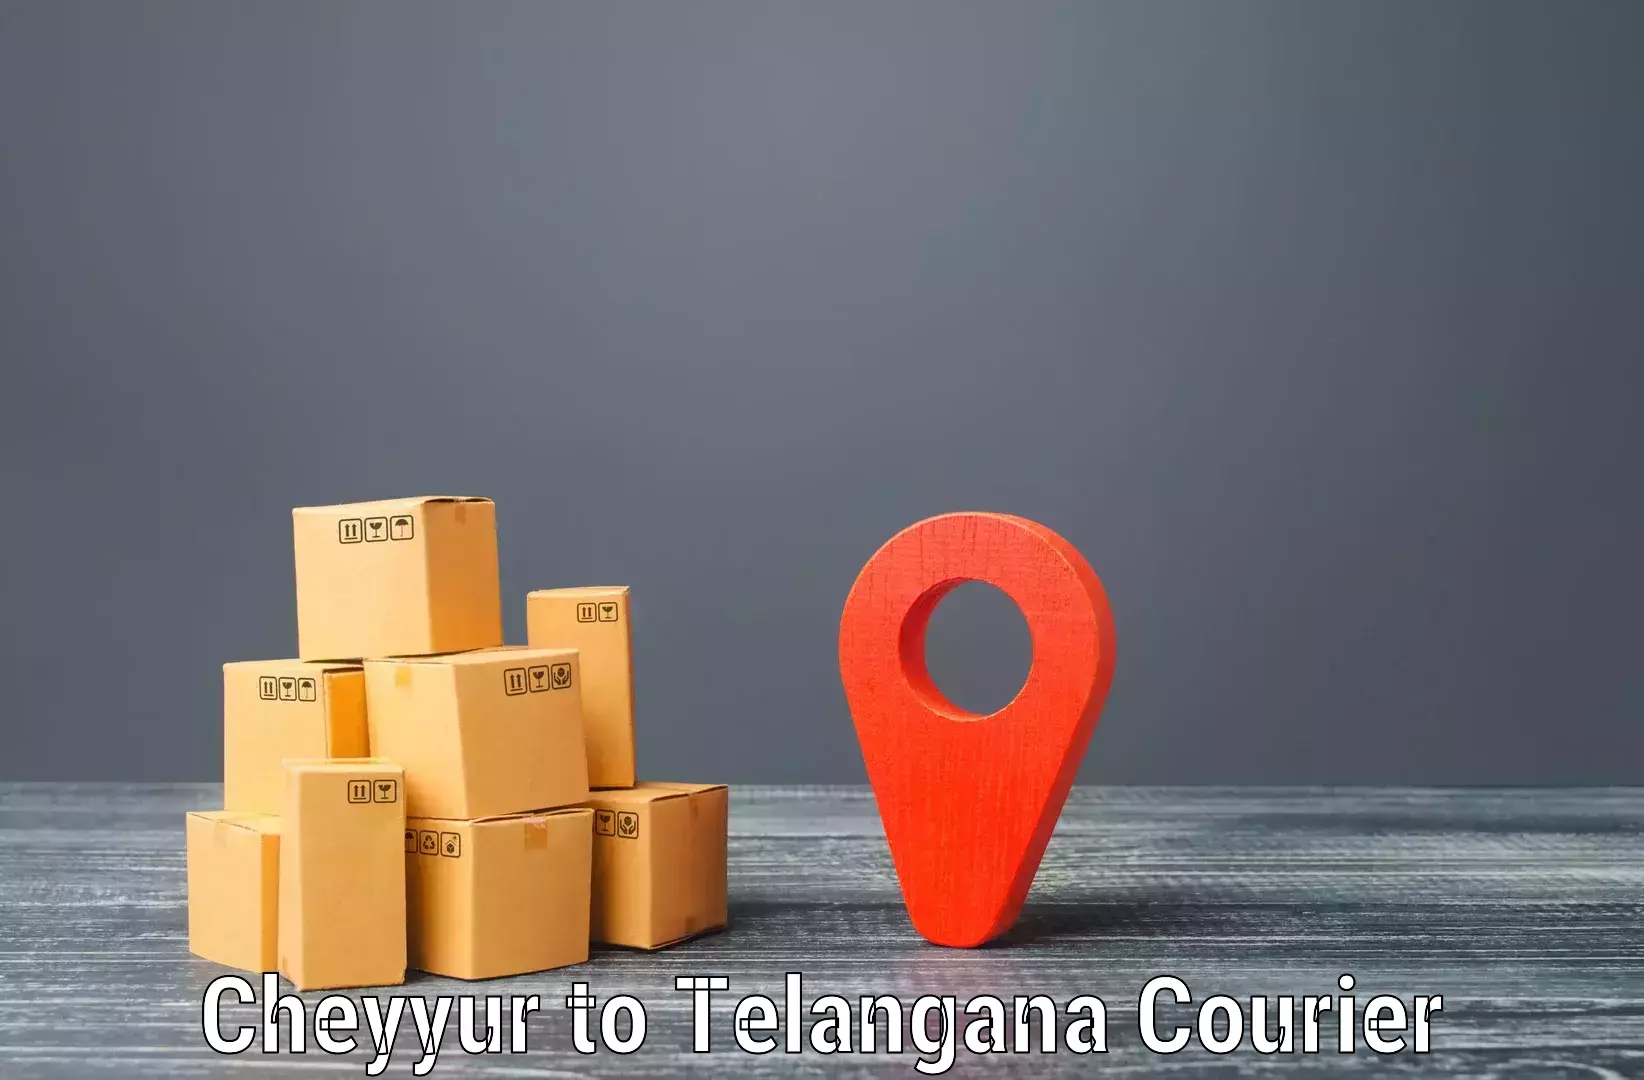 User-friendly delivery service Cheyyur to Nizamabad